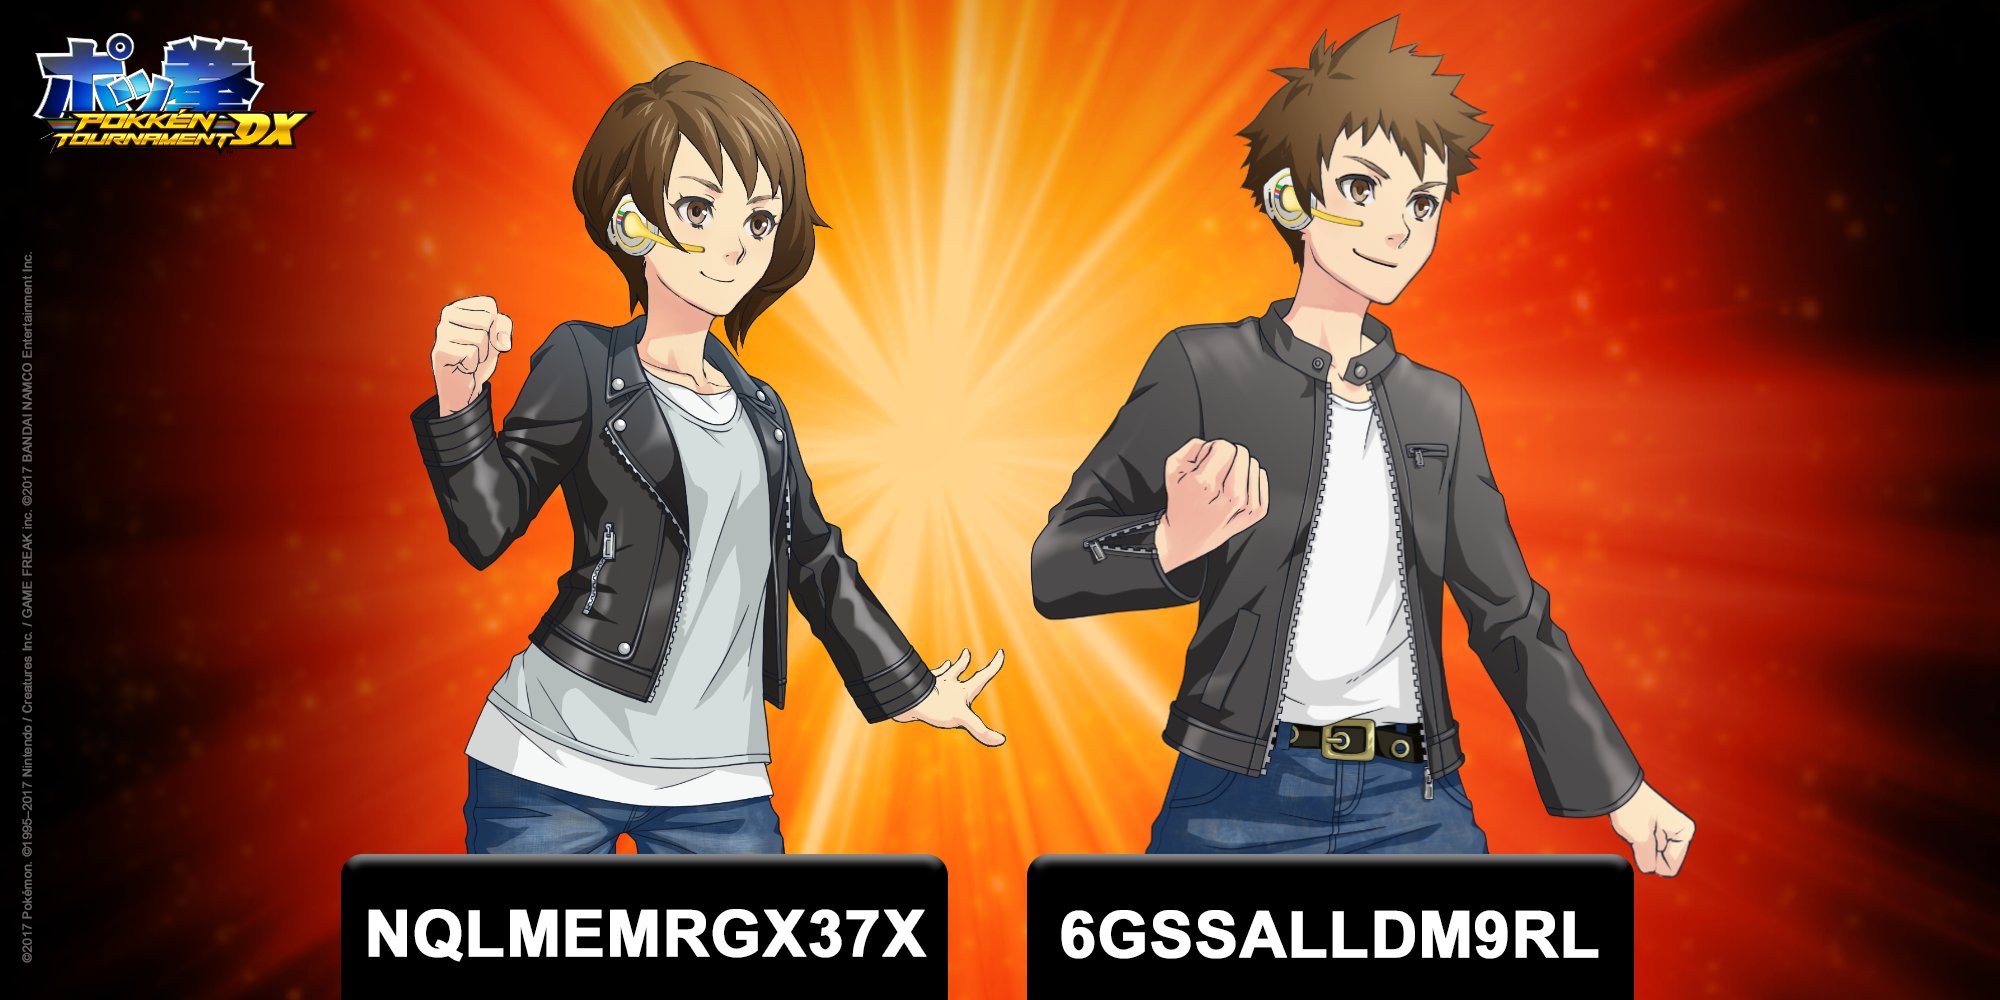 Special outfit codes for Pokken 